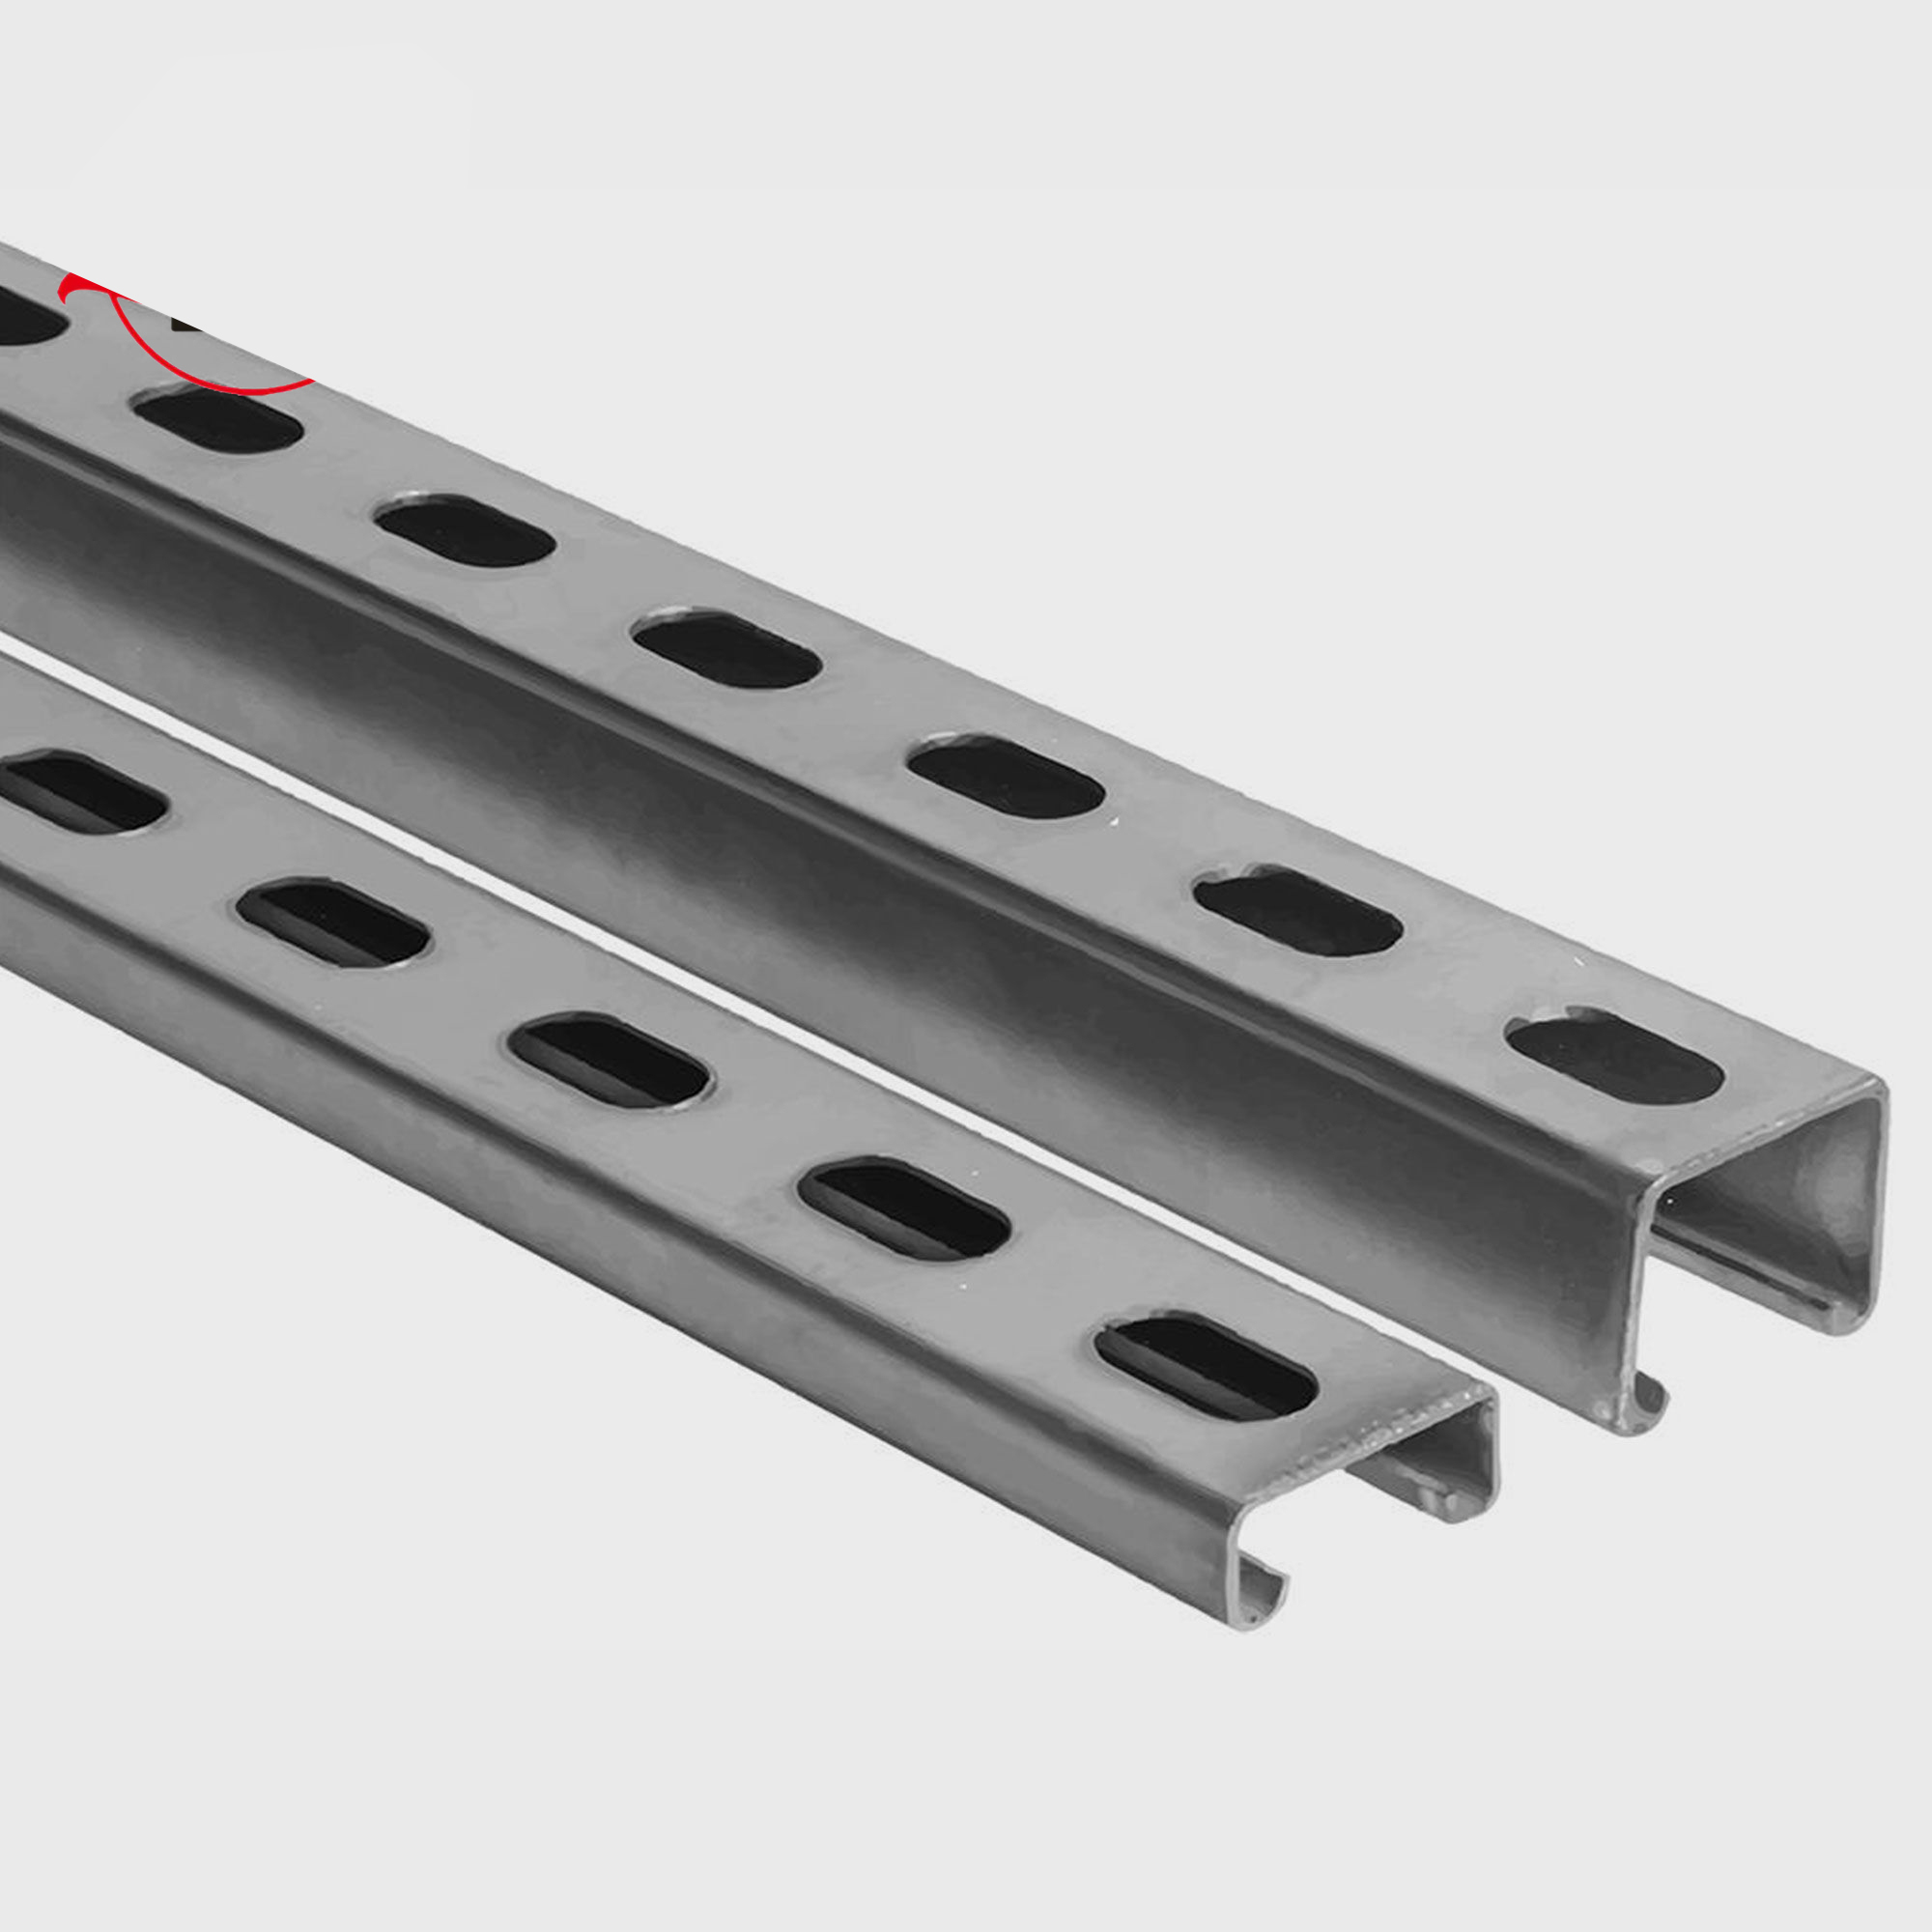 Hot Dip Galvanized Steel Slotted Strut Channel with CE( C Channel, Unistrut, Uni Strut Channel)